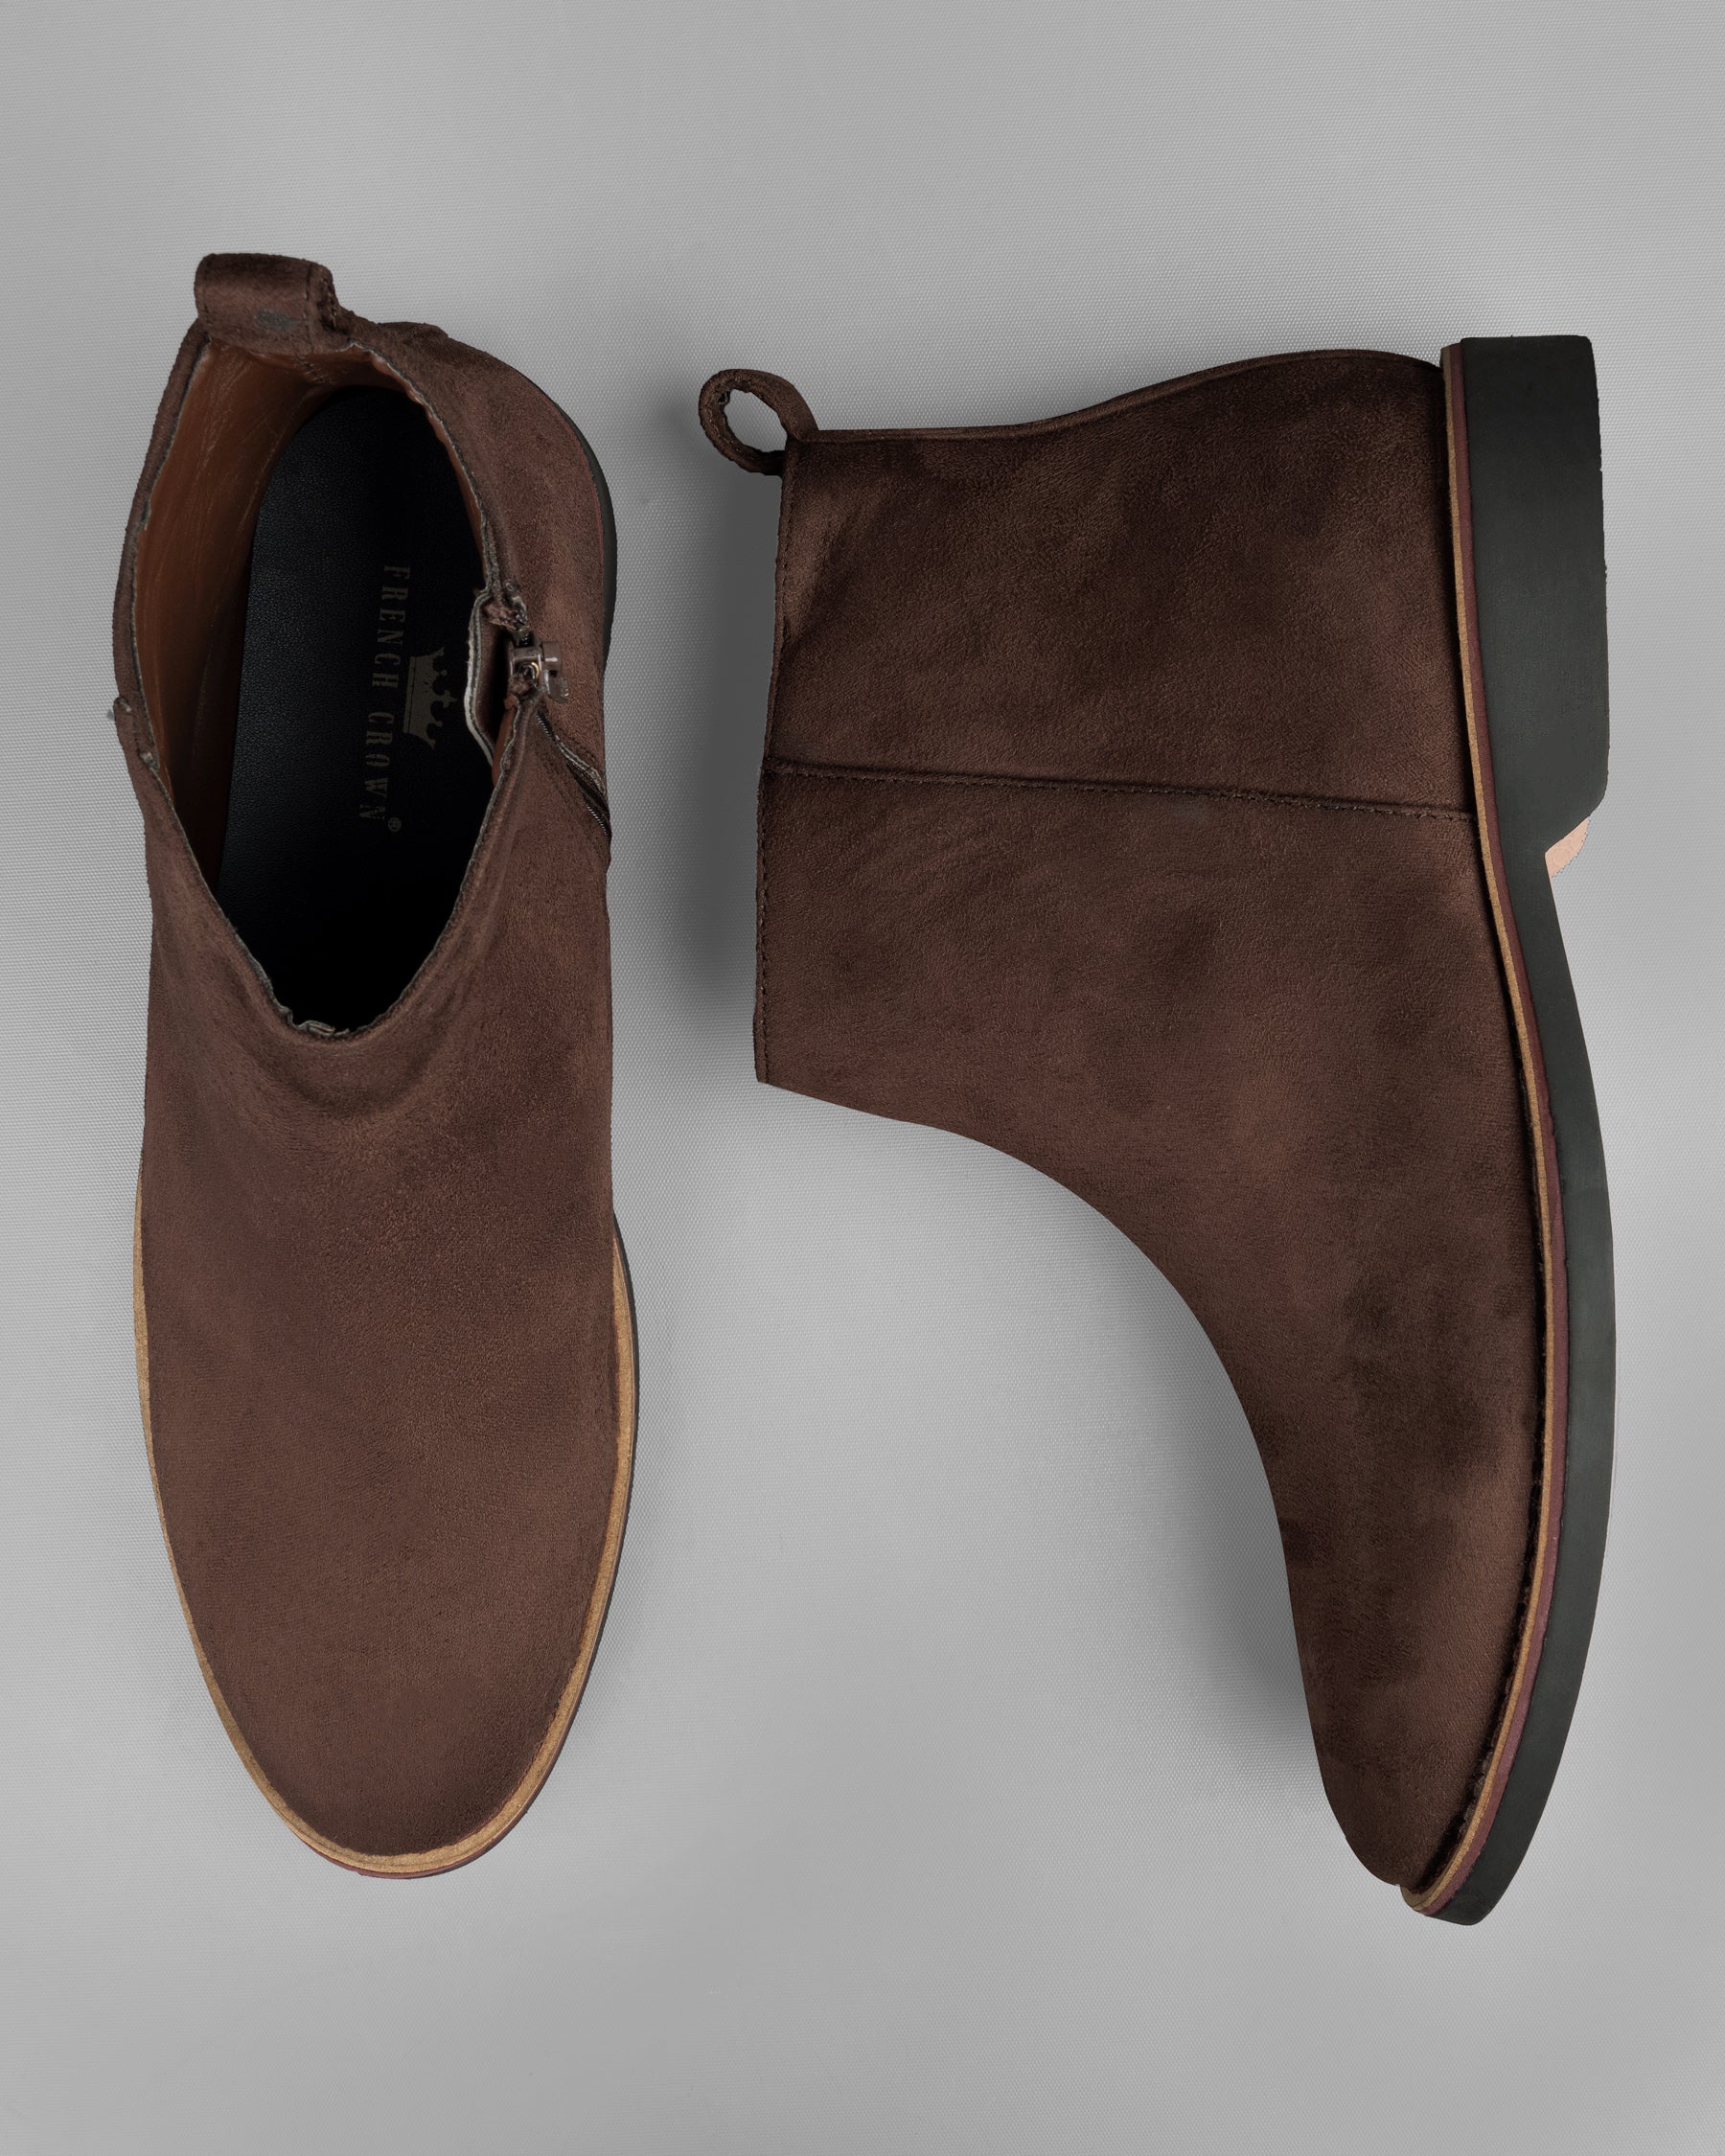 Taupe Brown Zipper suede Chelsea Boots FT064-6, FT064-7, FT064-8, FT064-9, FT064-10